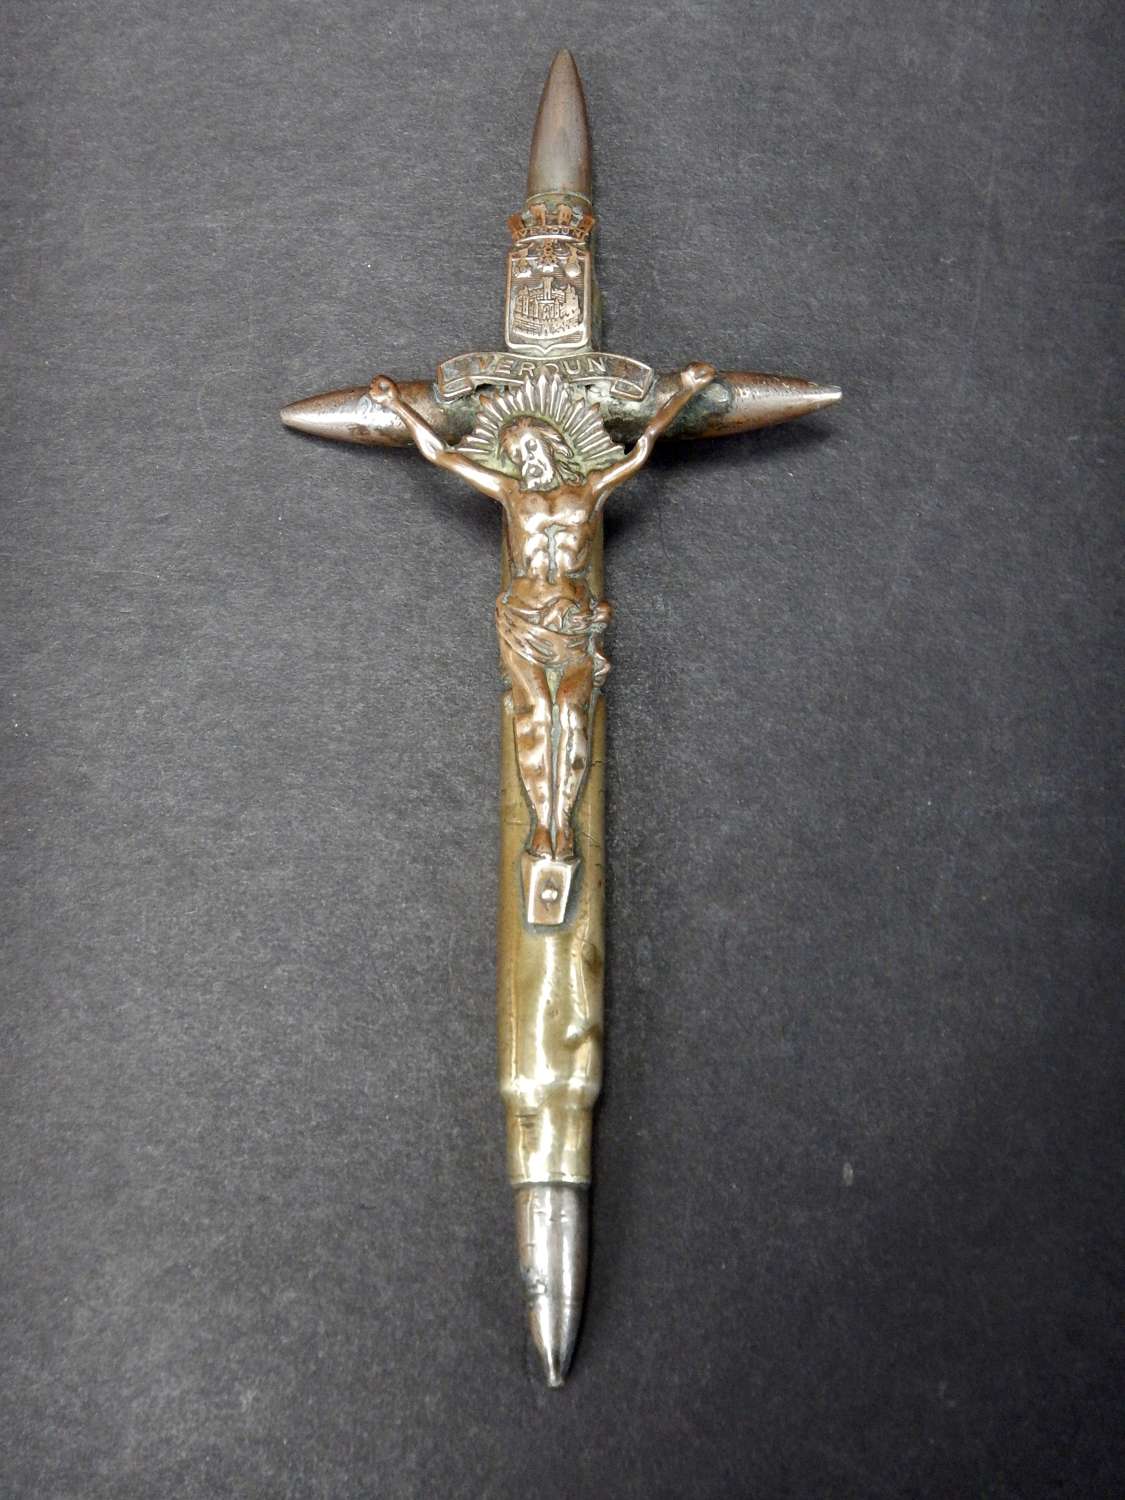 Exceptional Trench Art - French Military WW1 Army Trench Art Crucifix